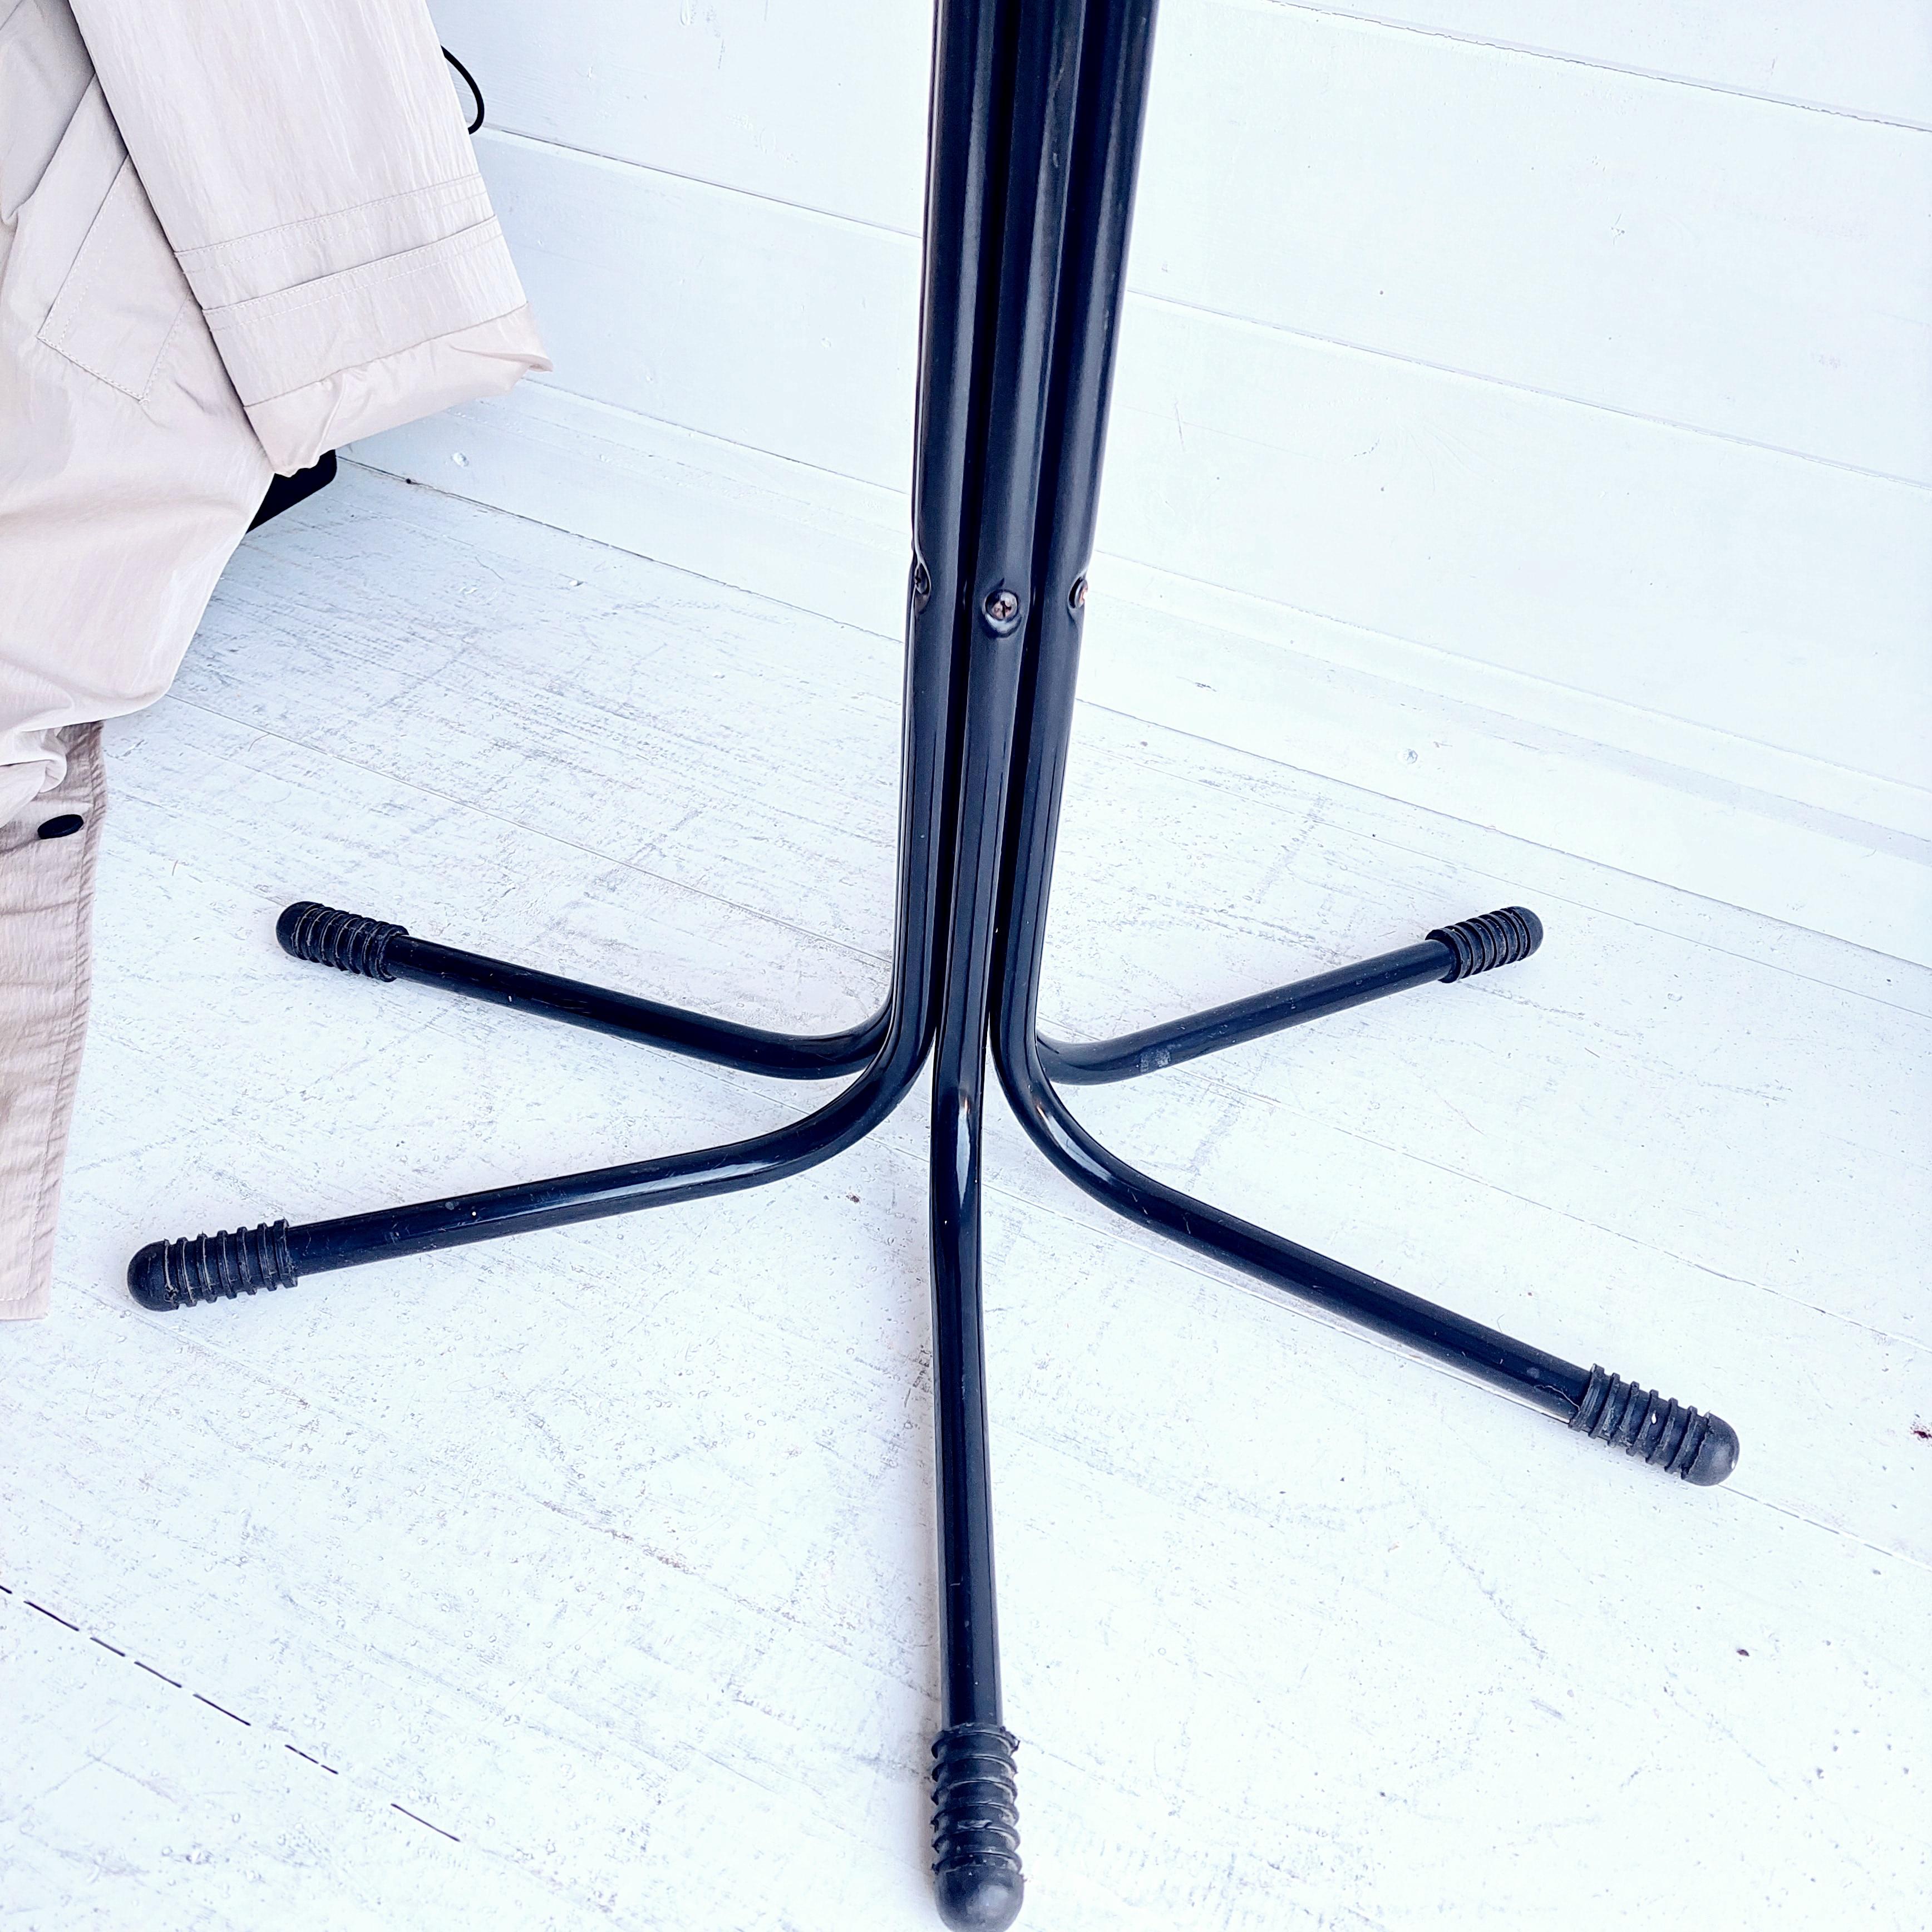 Late 20th Century Vintage Rigg Coat Stand by Tord Bjorklund for Ikea 80s Tubular Metal Black For Sale